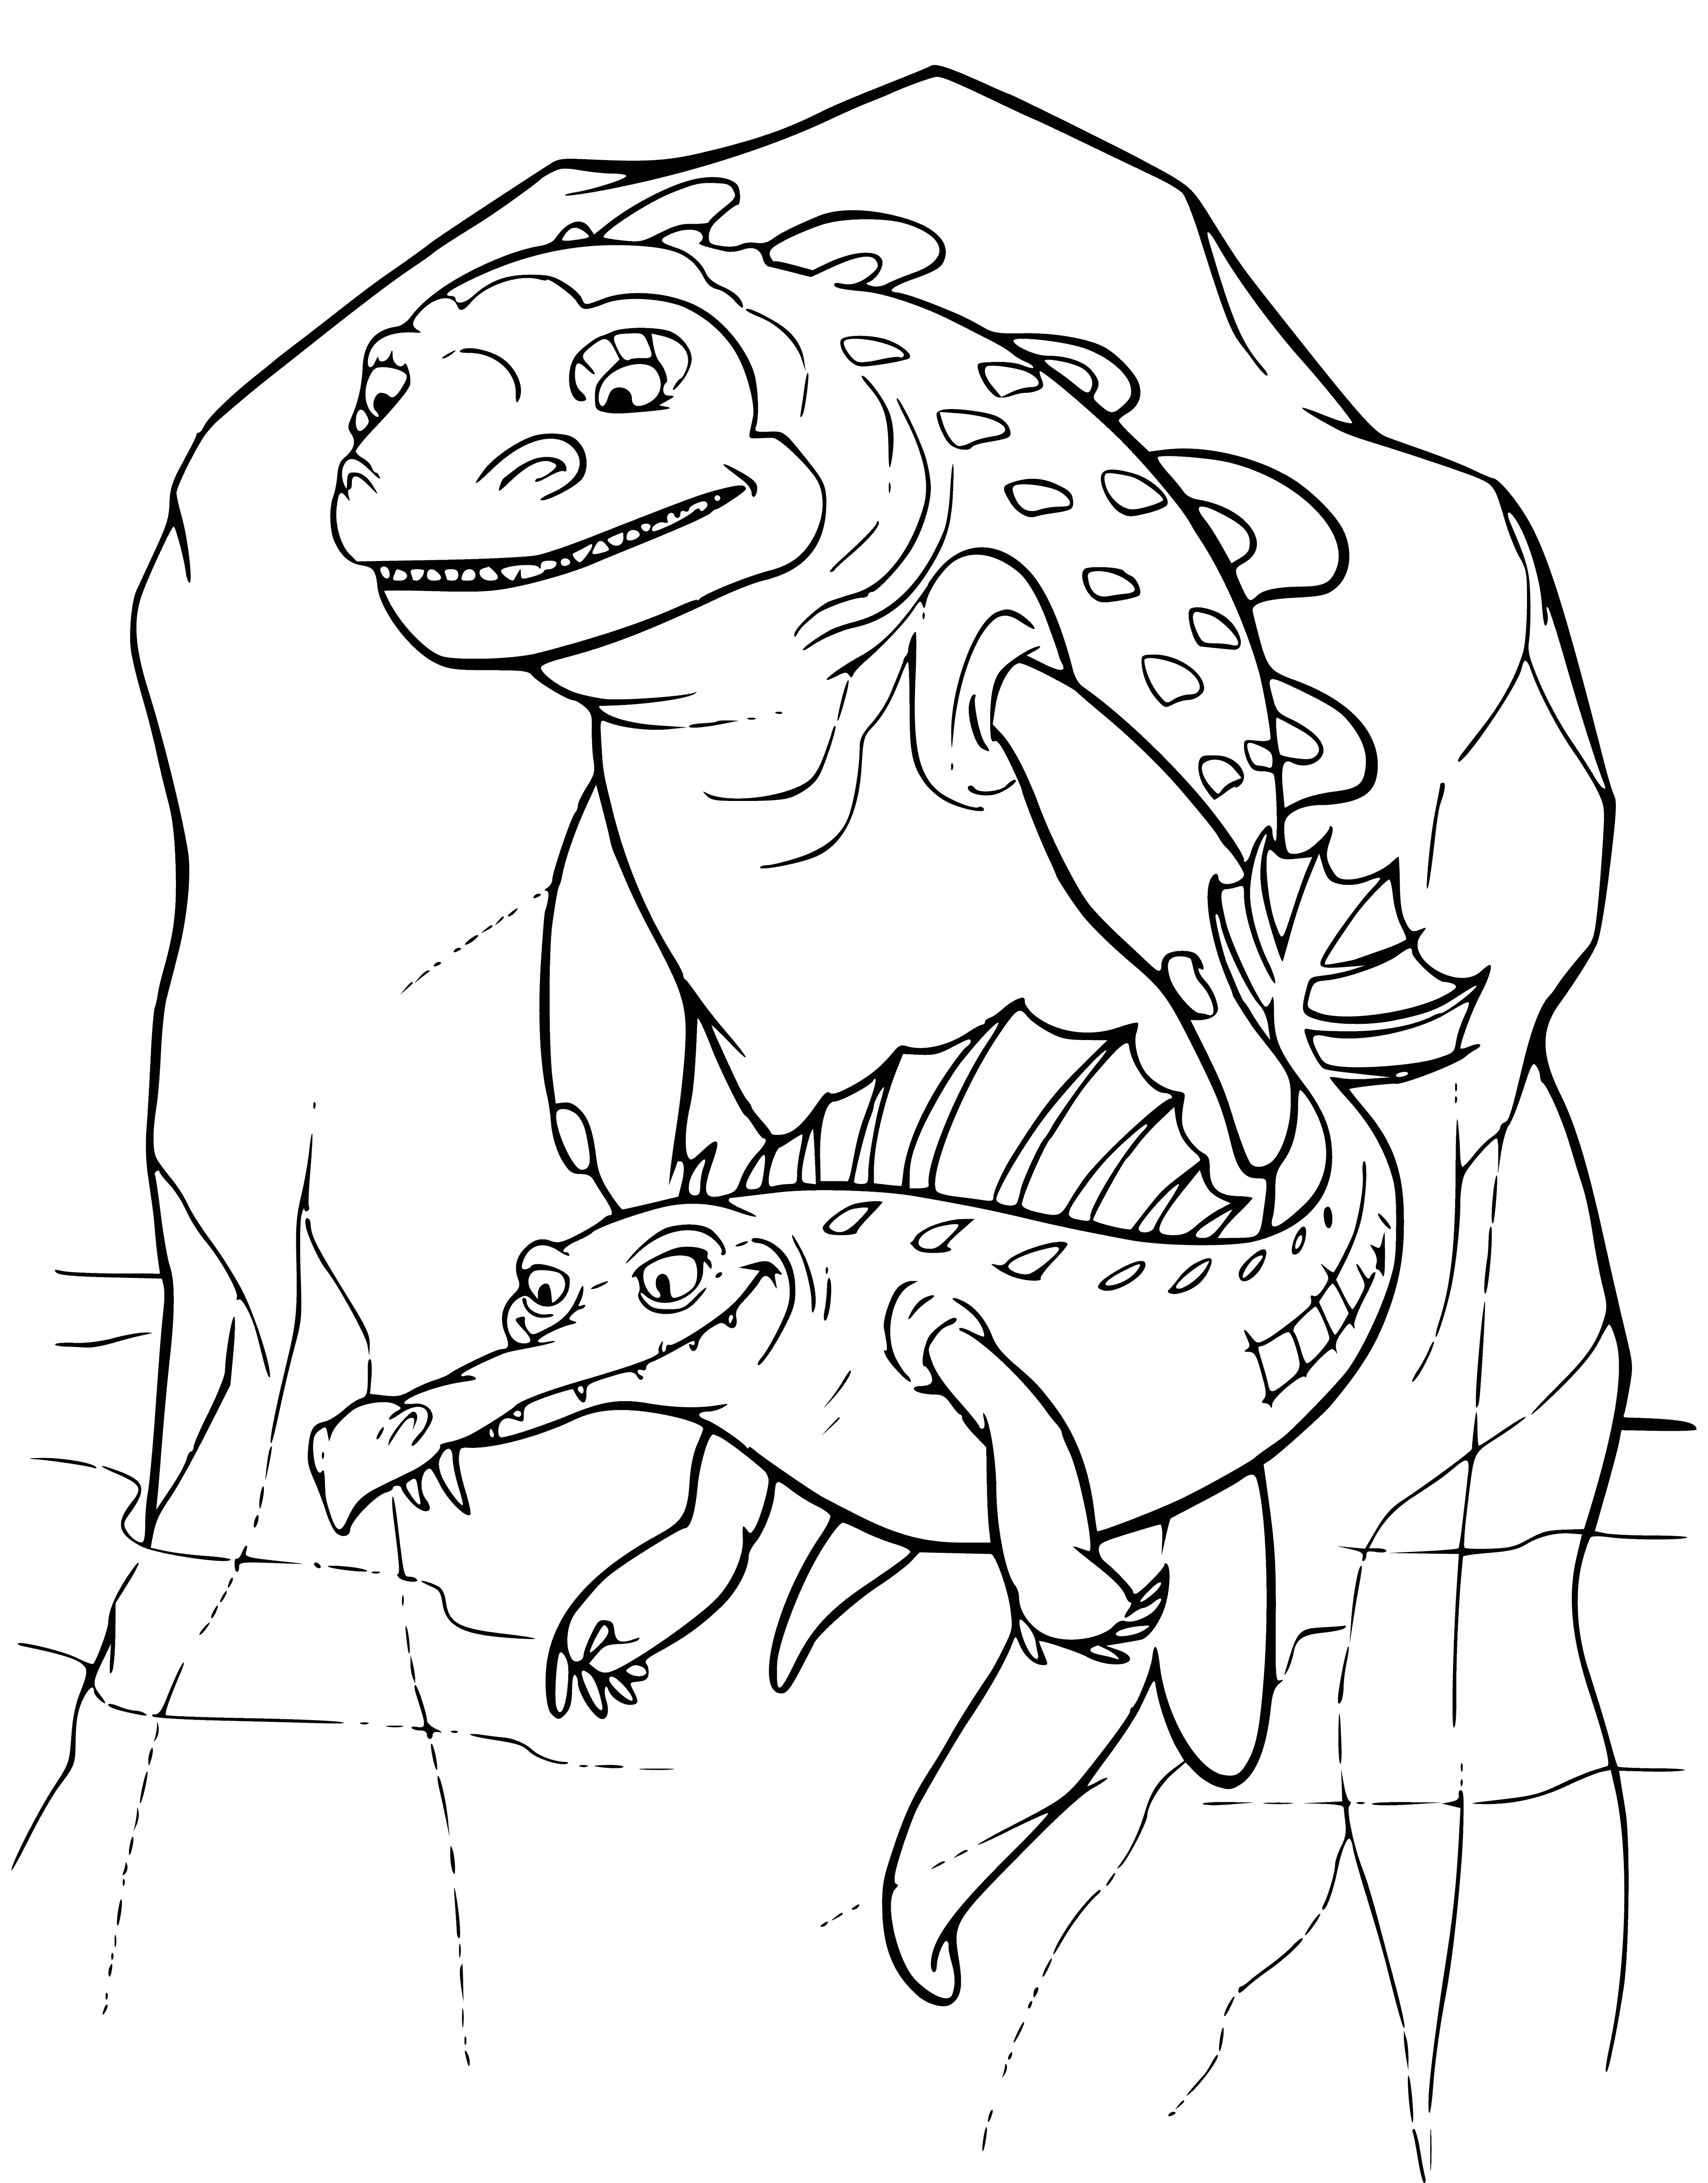 coloring page: Group of reptiles stands close, seeming to search for something in the far distance on a large sheet of ice.